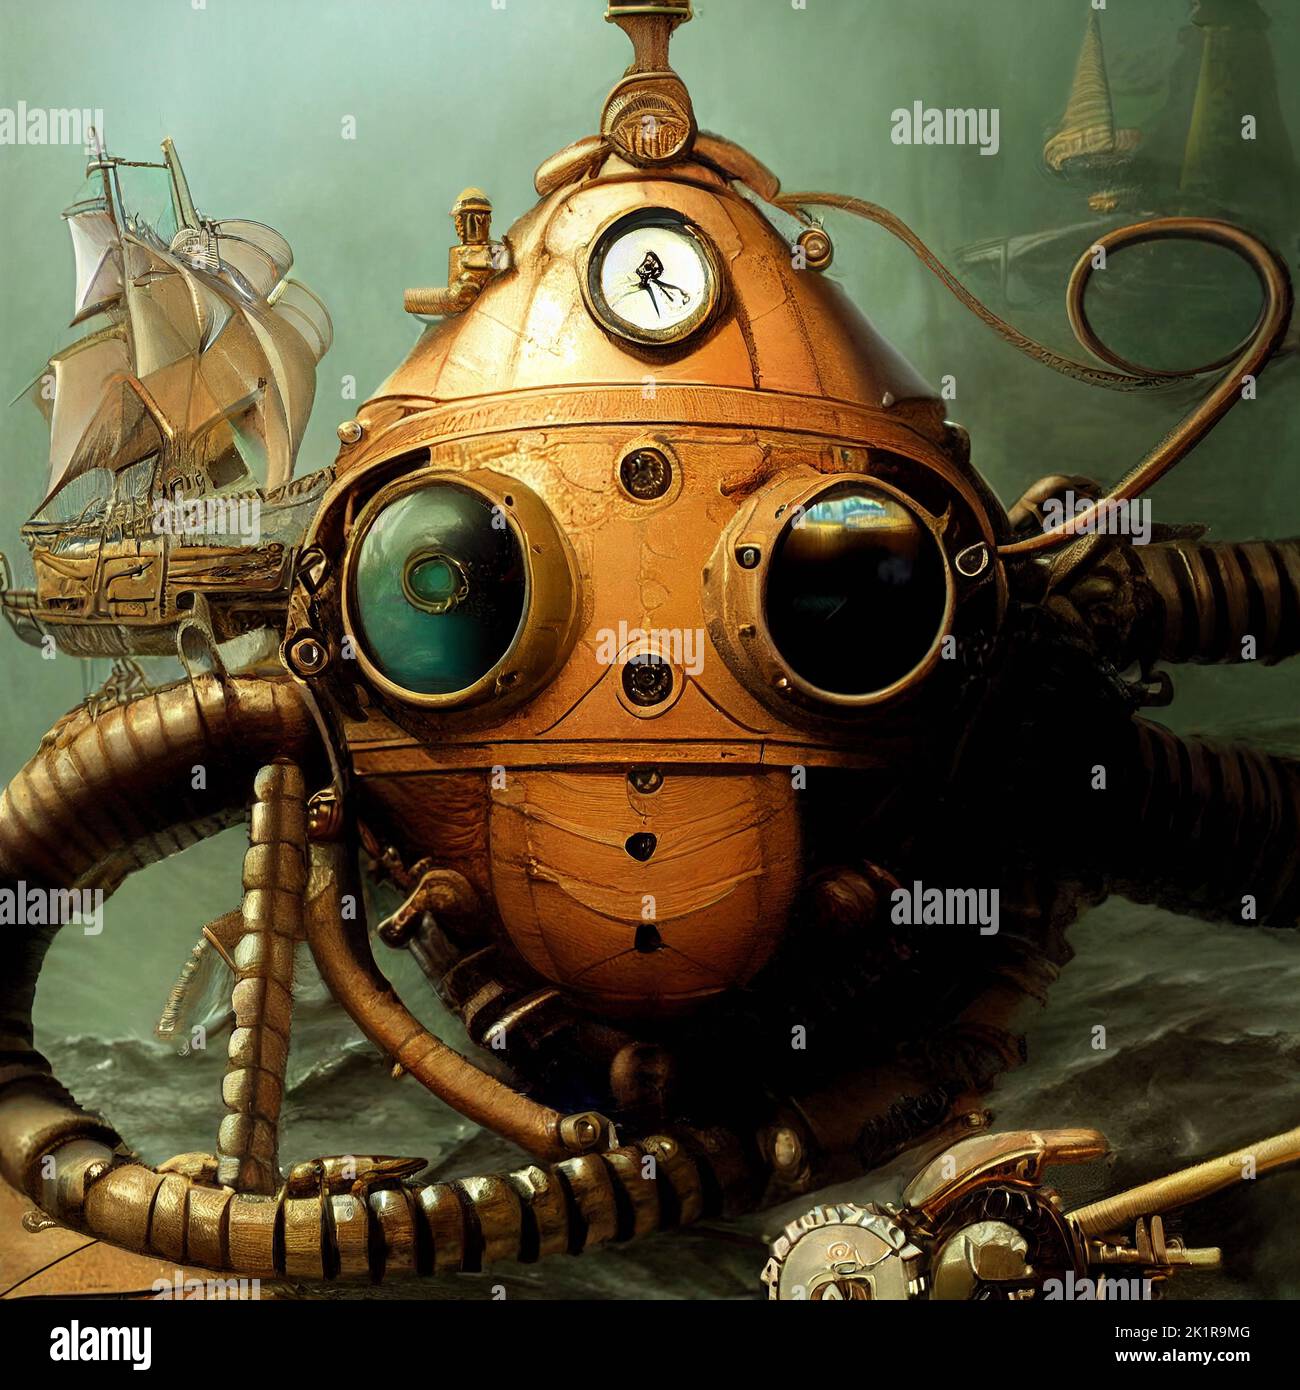 sci-fi fantasy illustration: mechanical marine creature for the deep sea exploration in steampunk octopus style Stock Photo